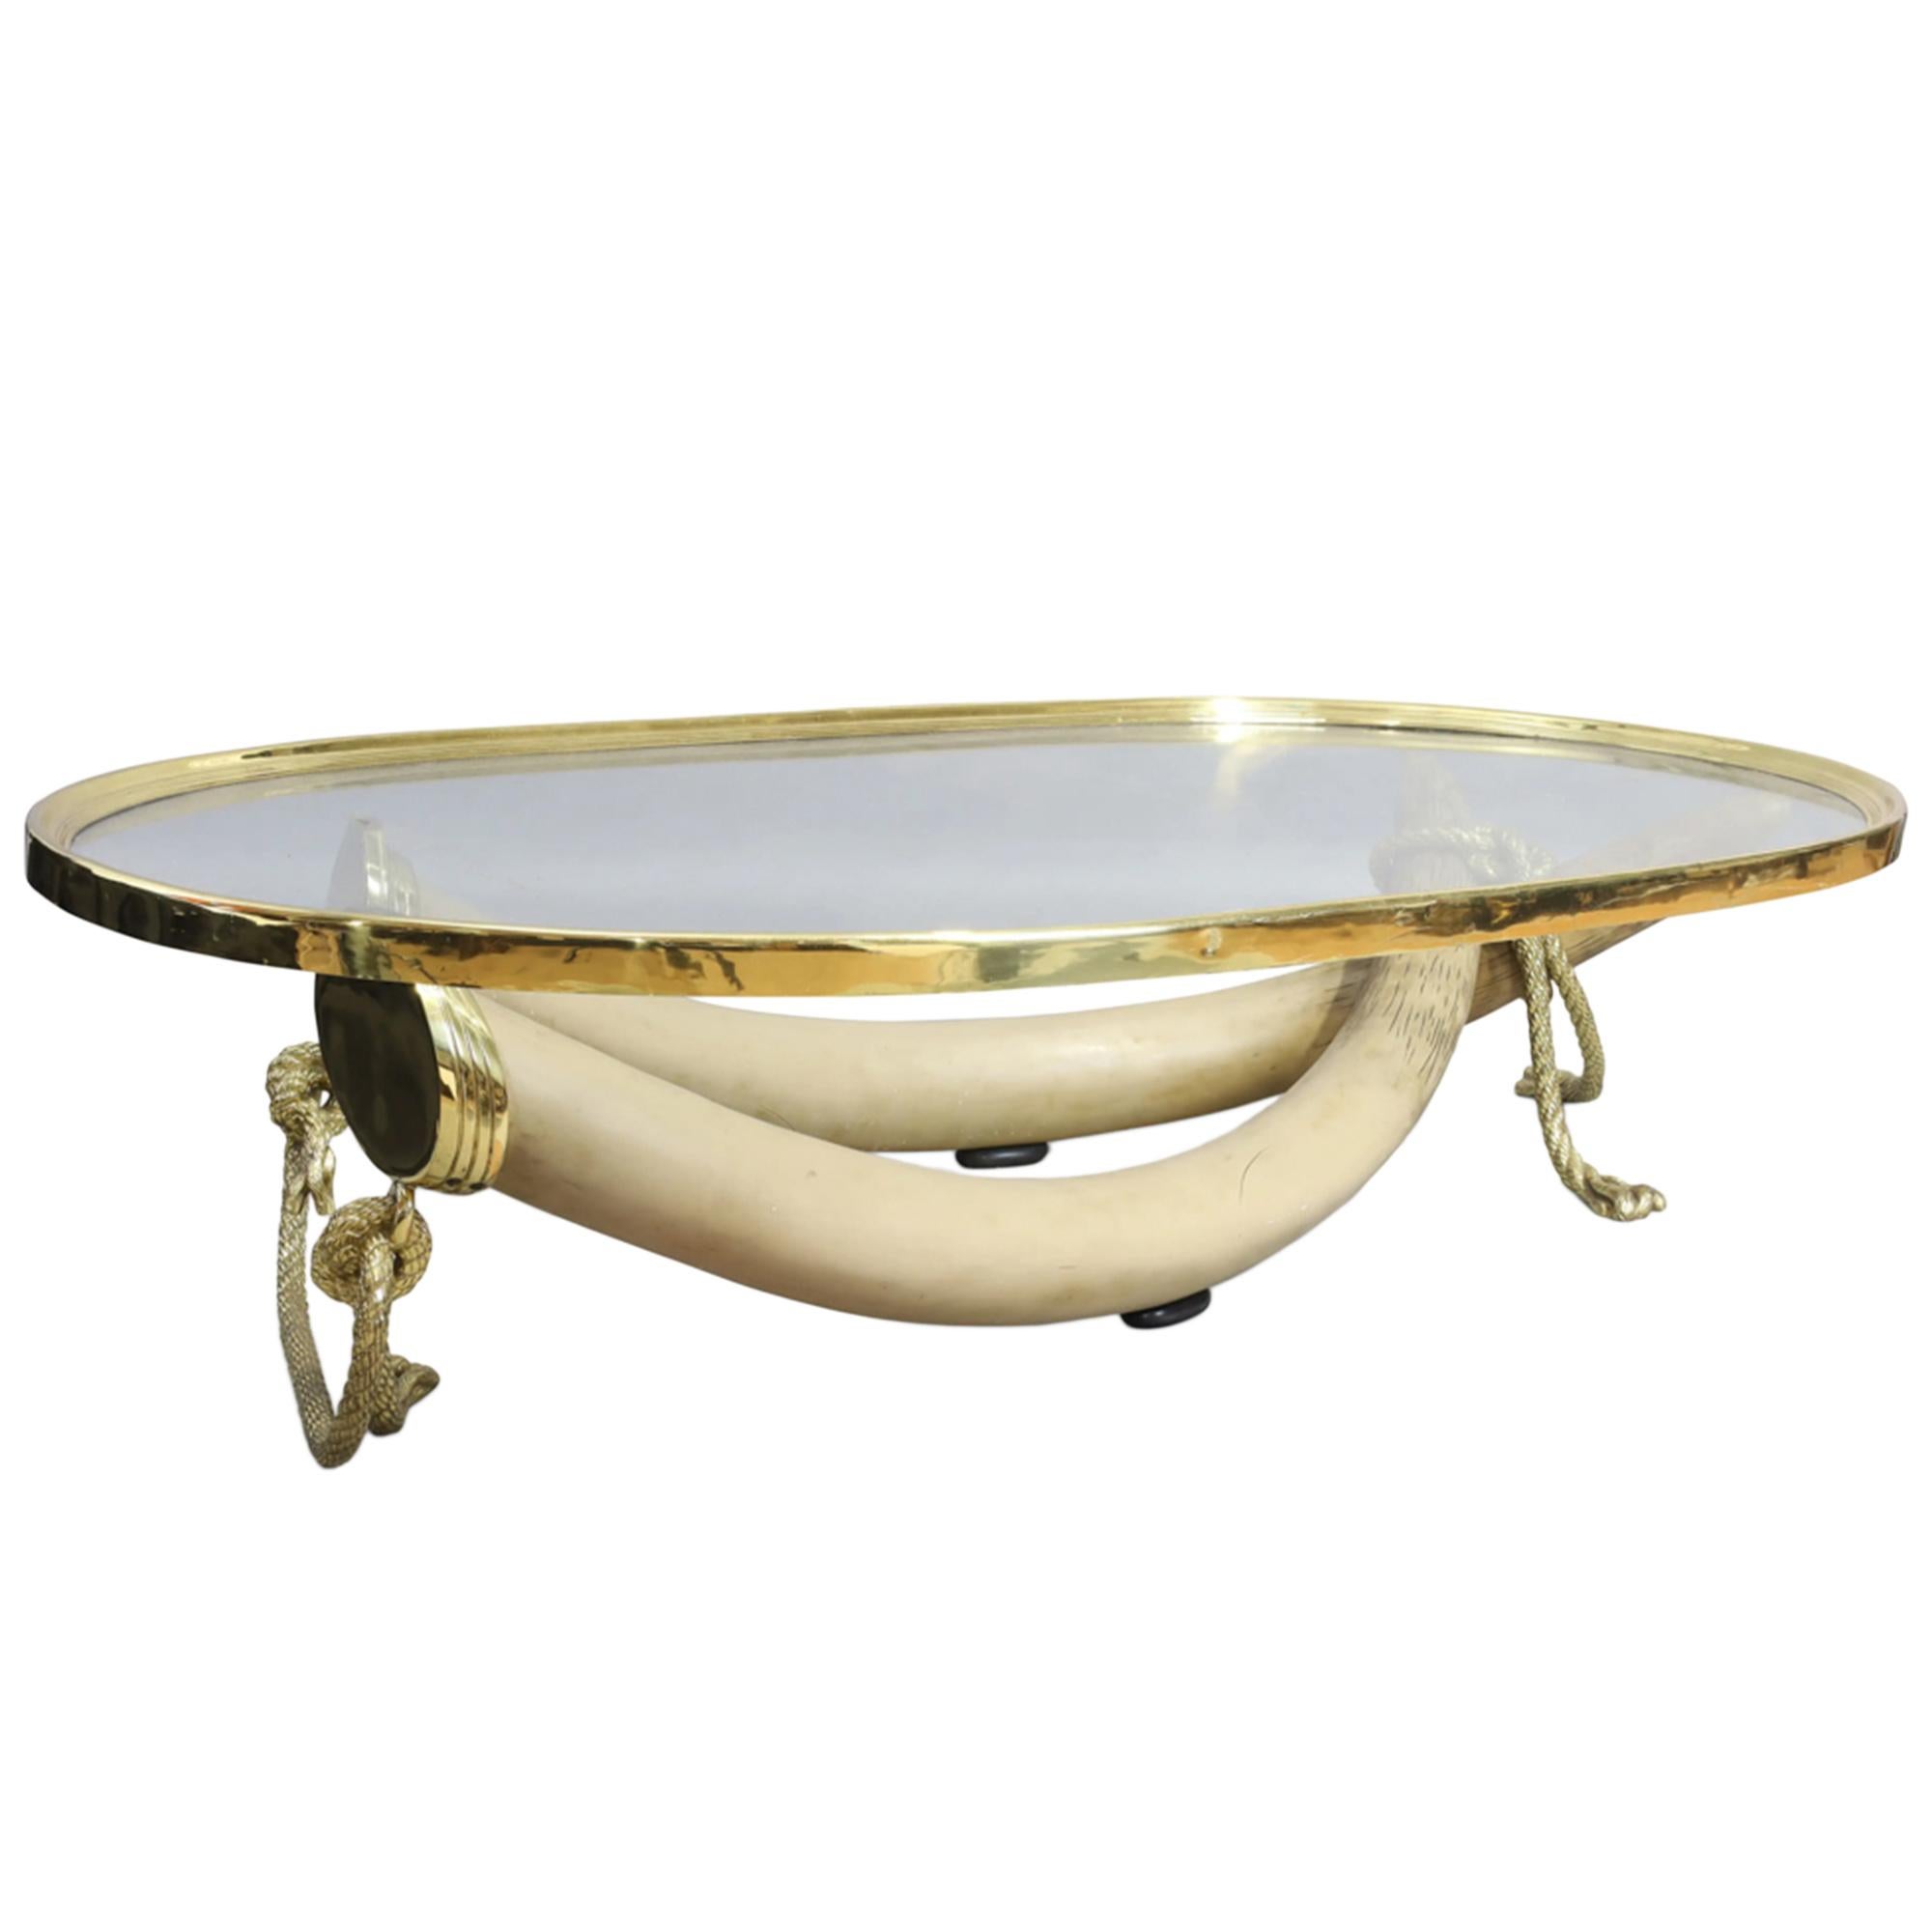 Italo Valenti Faux Tusk and Gilt Bronze Coffee Table In Good Condition For Sale In London, GB